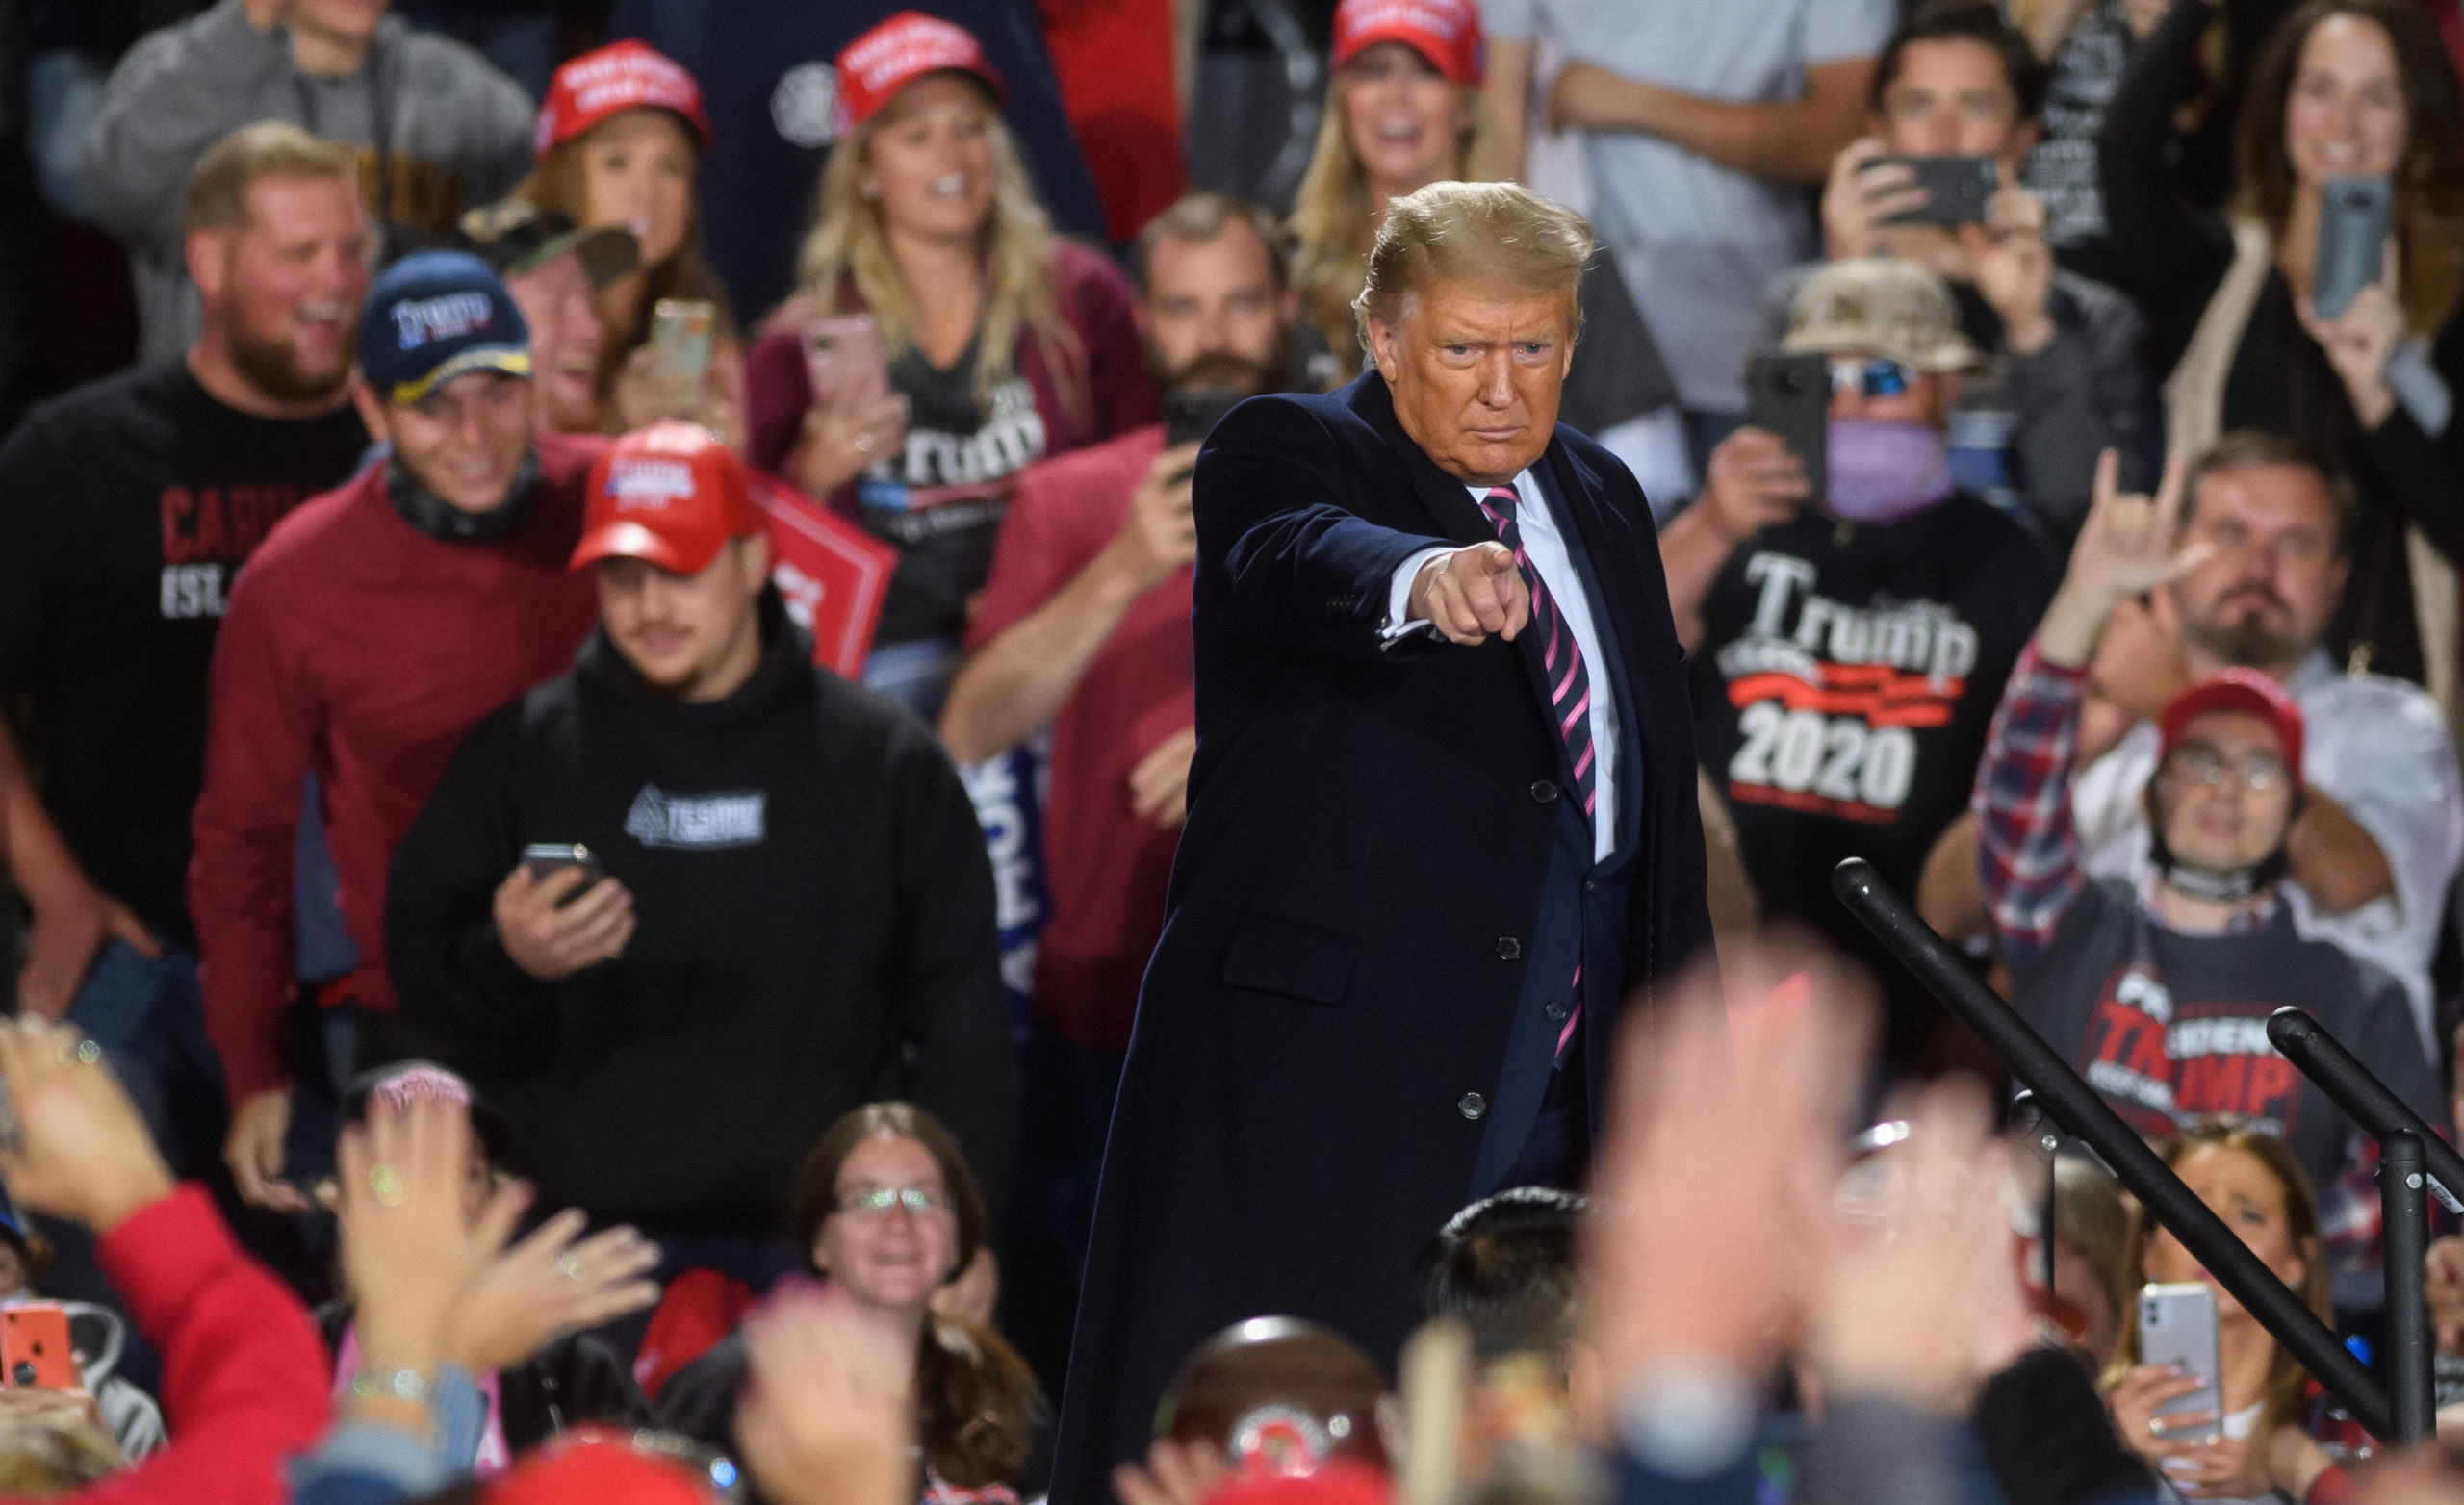 MOON TOWNSHIP, PA - SEPTEMBER 22: President Donald Trump speaks at a campaign rally at Atlantic Aviation on September 22, 2020 in Moon Township, Pennsylvania. Trump won Pennsylvania by less than a percentage point in 2016 and is currently in a tight race with Democratic nominee, former Vice President Joe Biden. (Photo by Jeff Swensen/Getty Images)